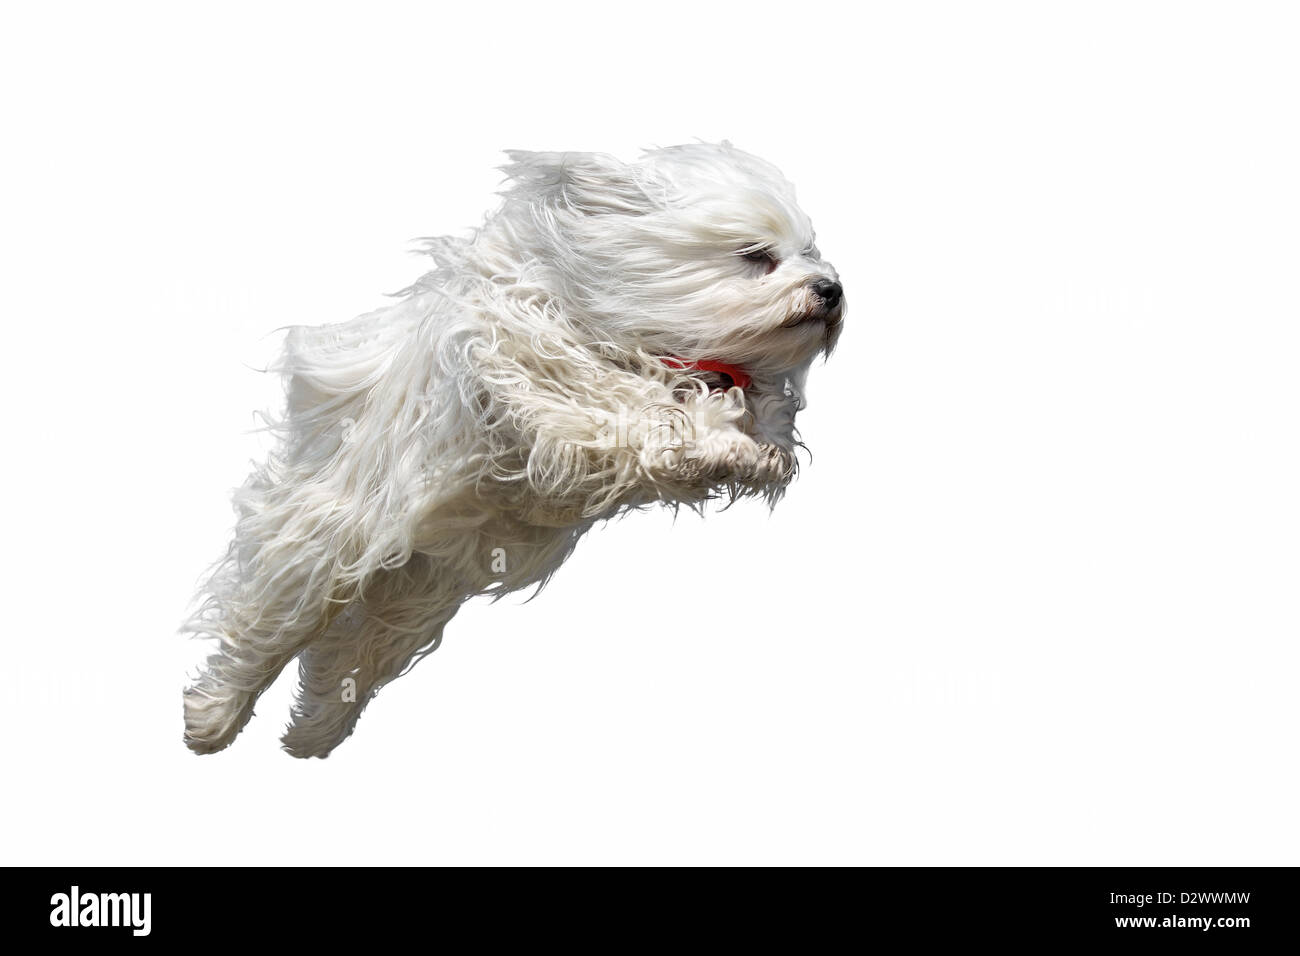 Long haired white dog breed (Havanese) flies straight with a red scarf in the air. Isolated on white background. Stock Photo